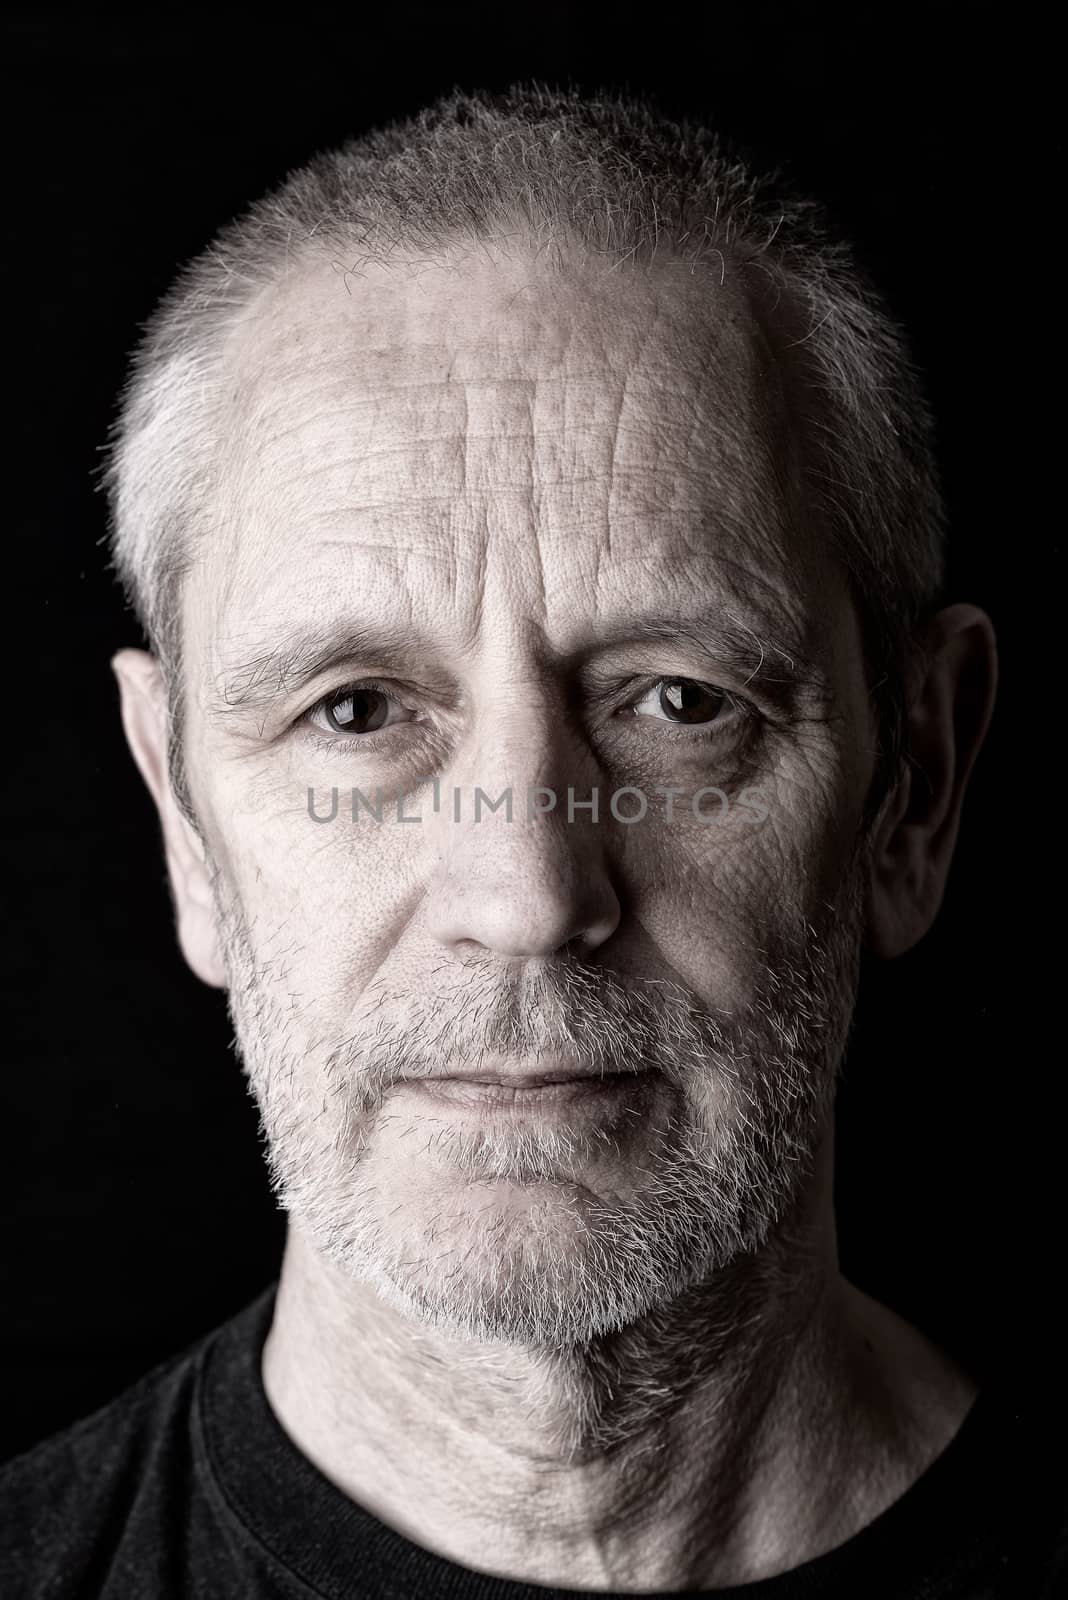 Portrait of a serious and confident man with a penetrating gaze and a bit of sadness in the eyes